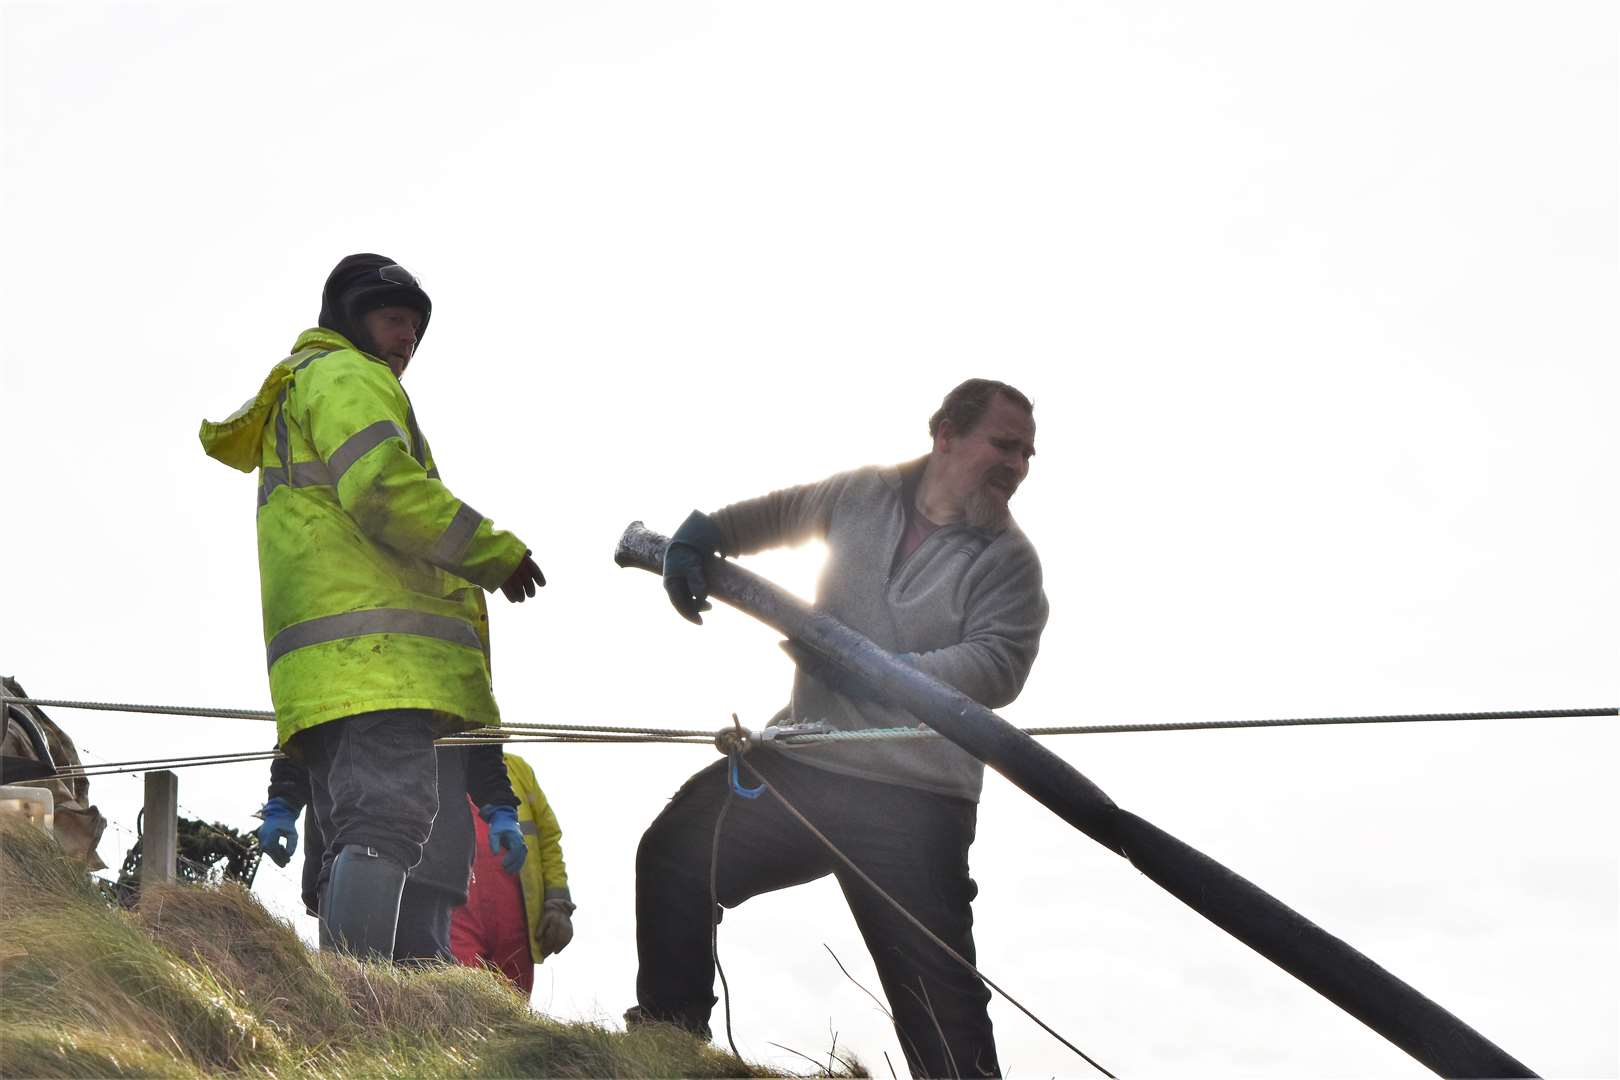 The volunteers set up a Tyrolean traverse line to help remove the discarded creels.